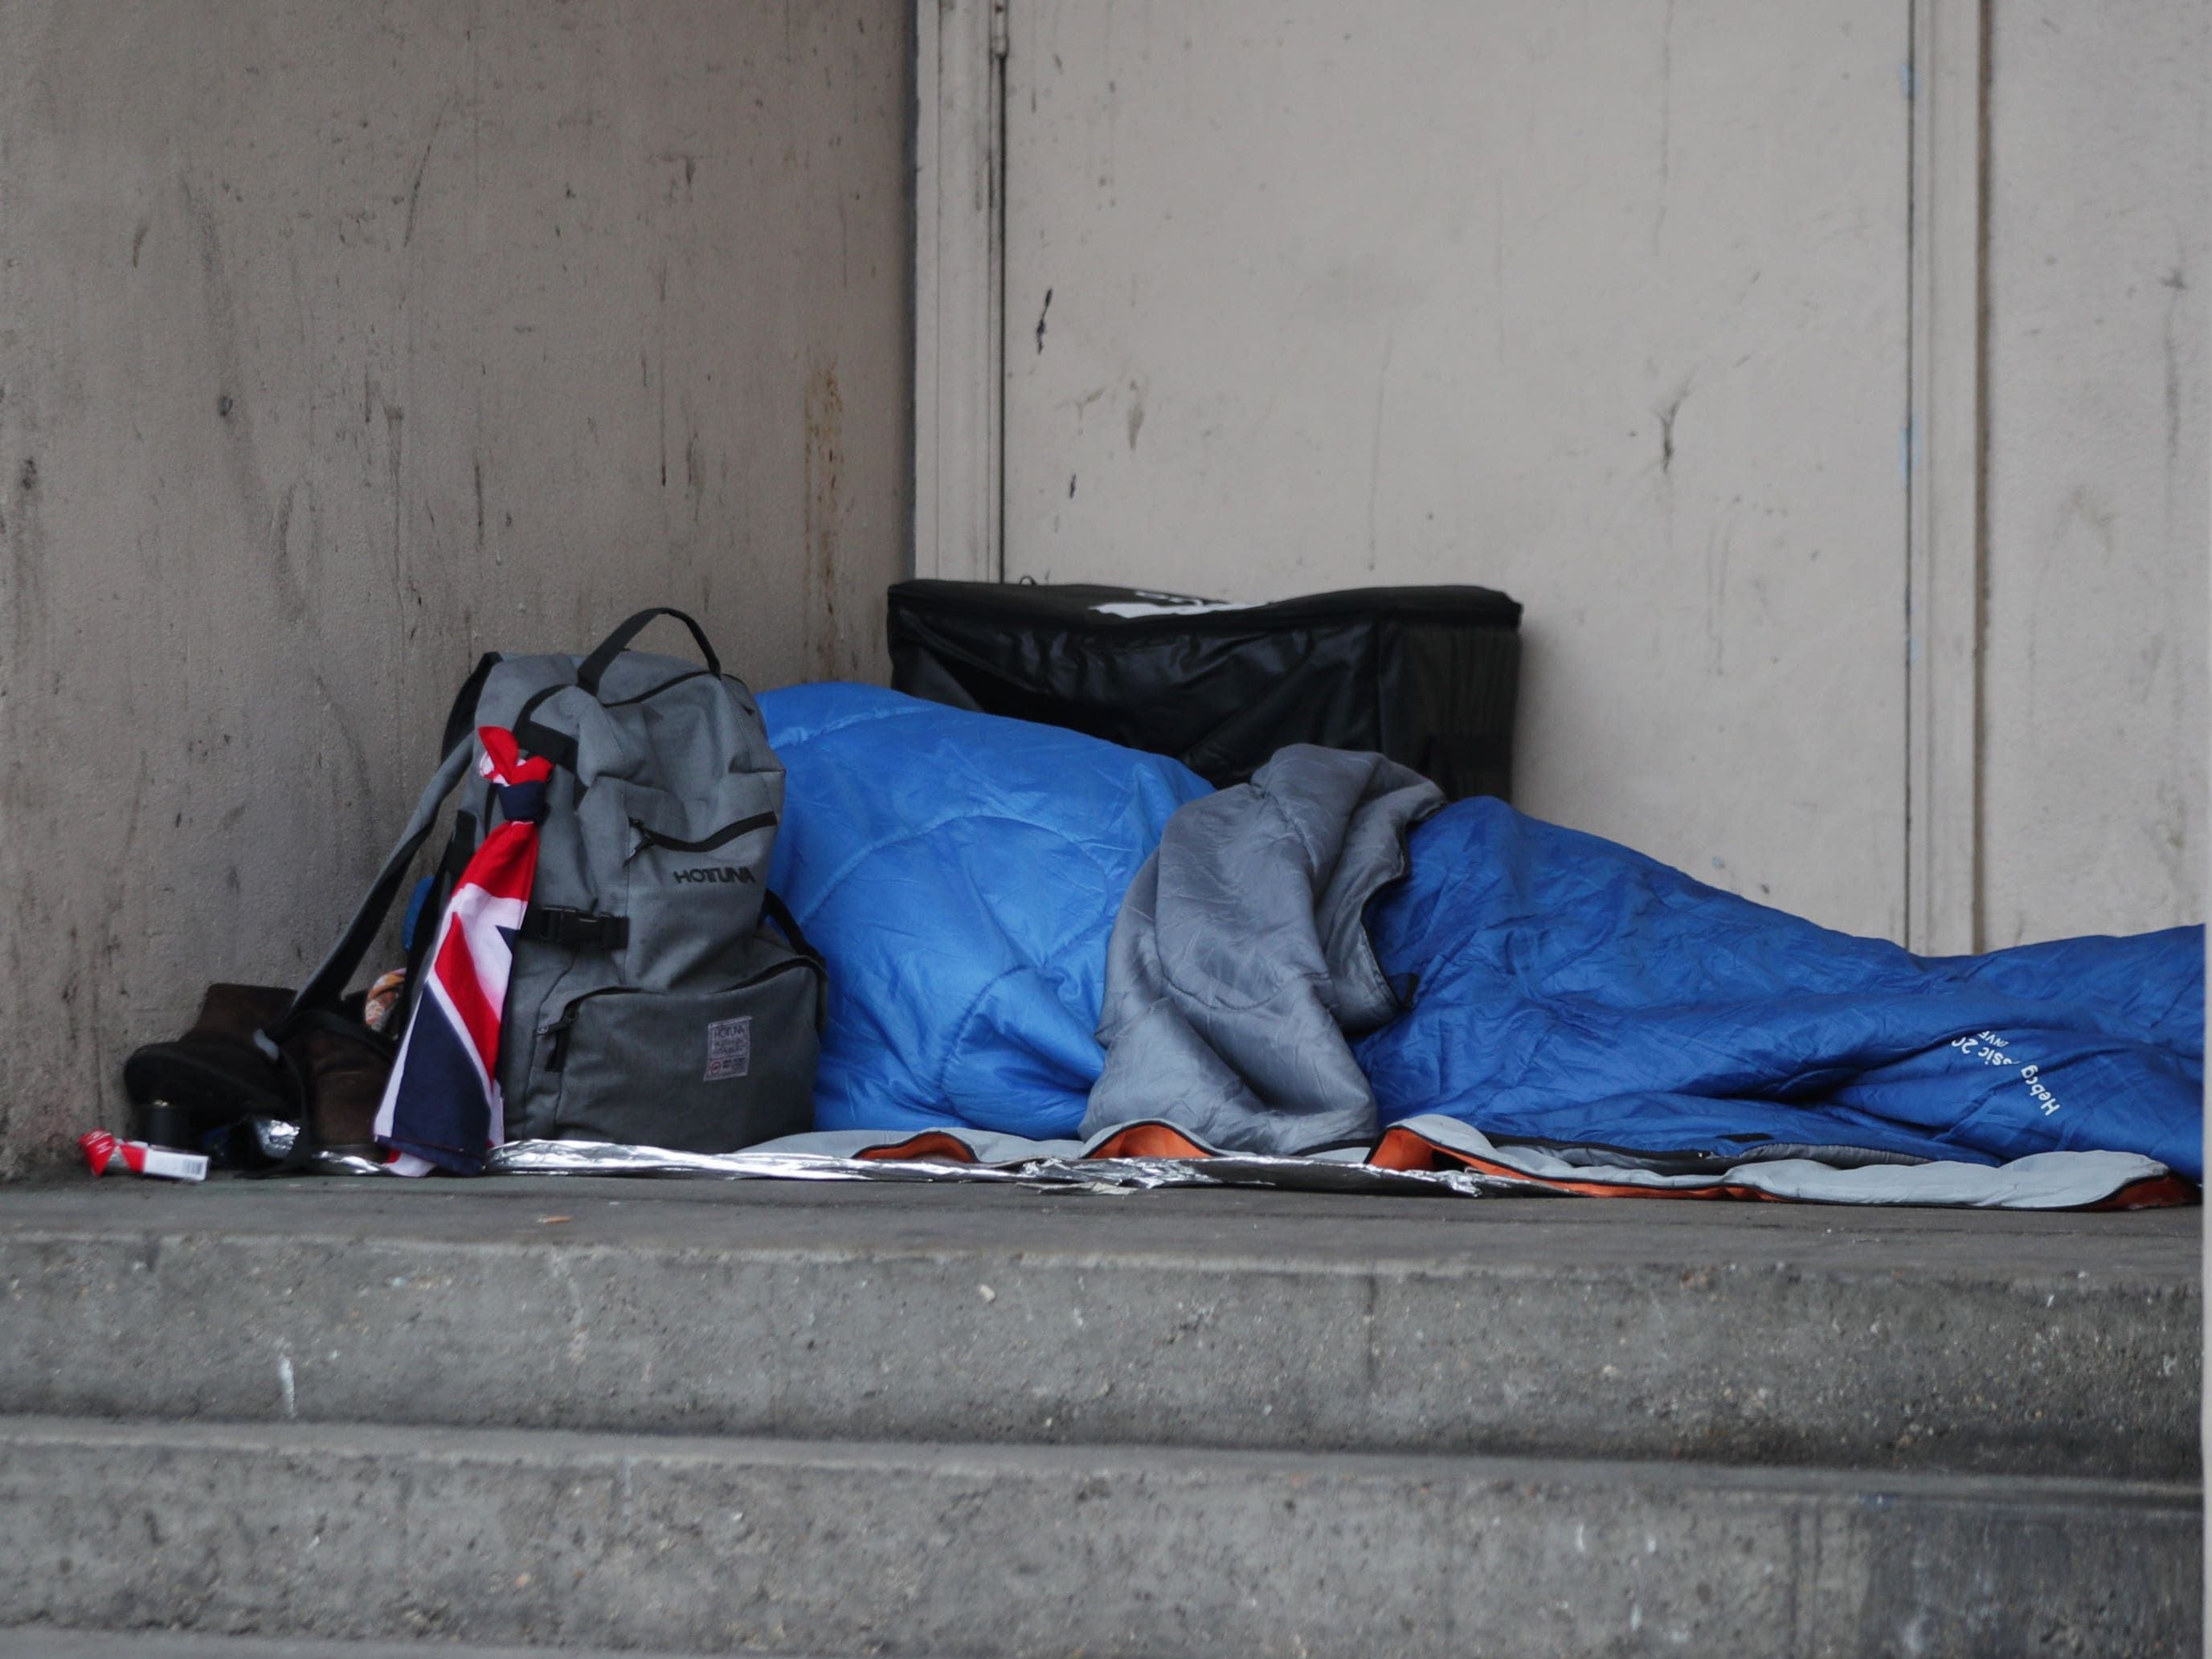 ‘Smells’ cut from Bill but charities fear homeless will still be criminalised